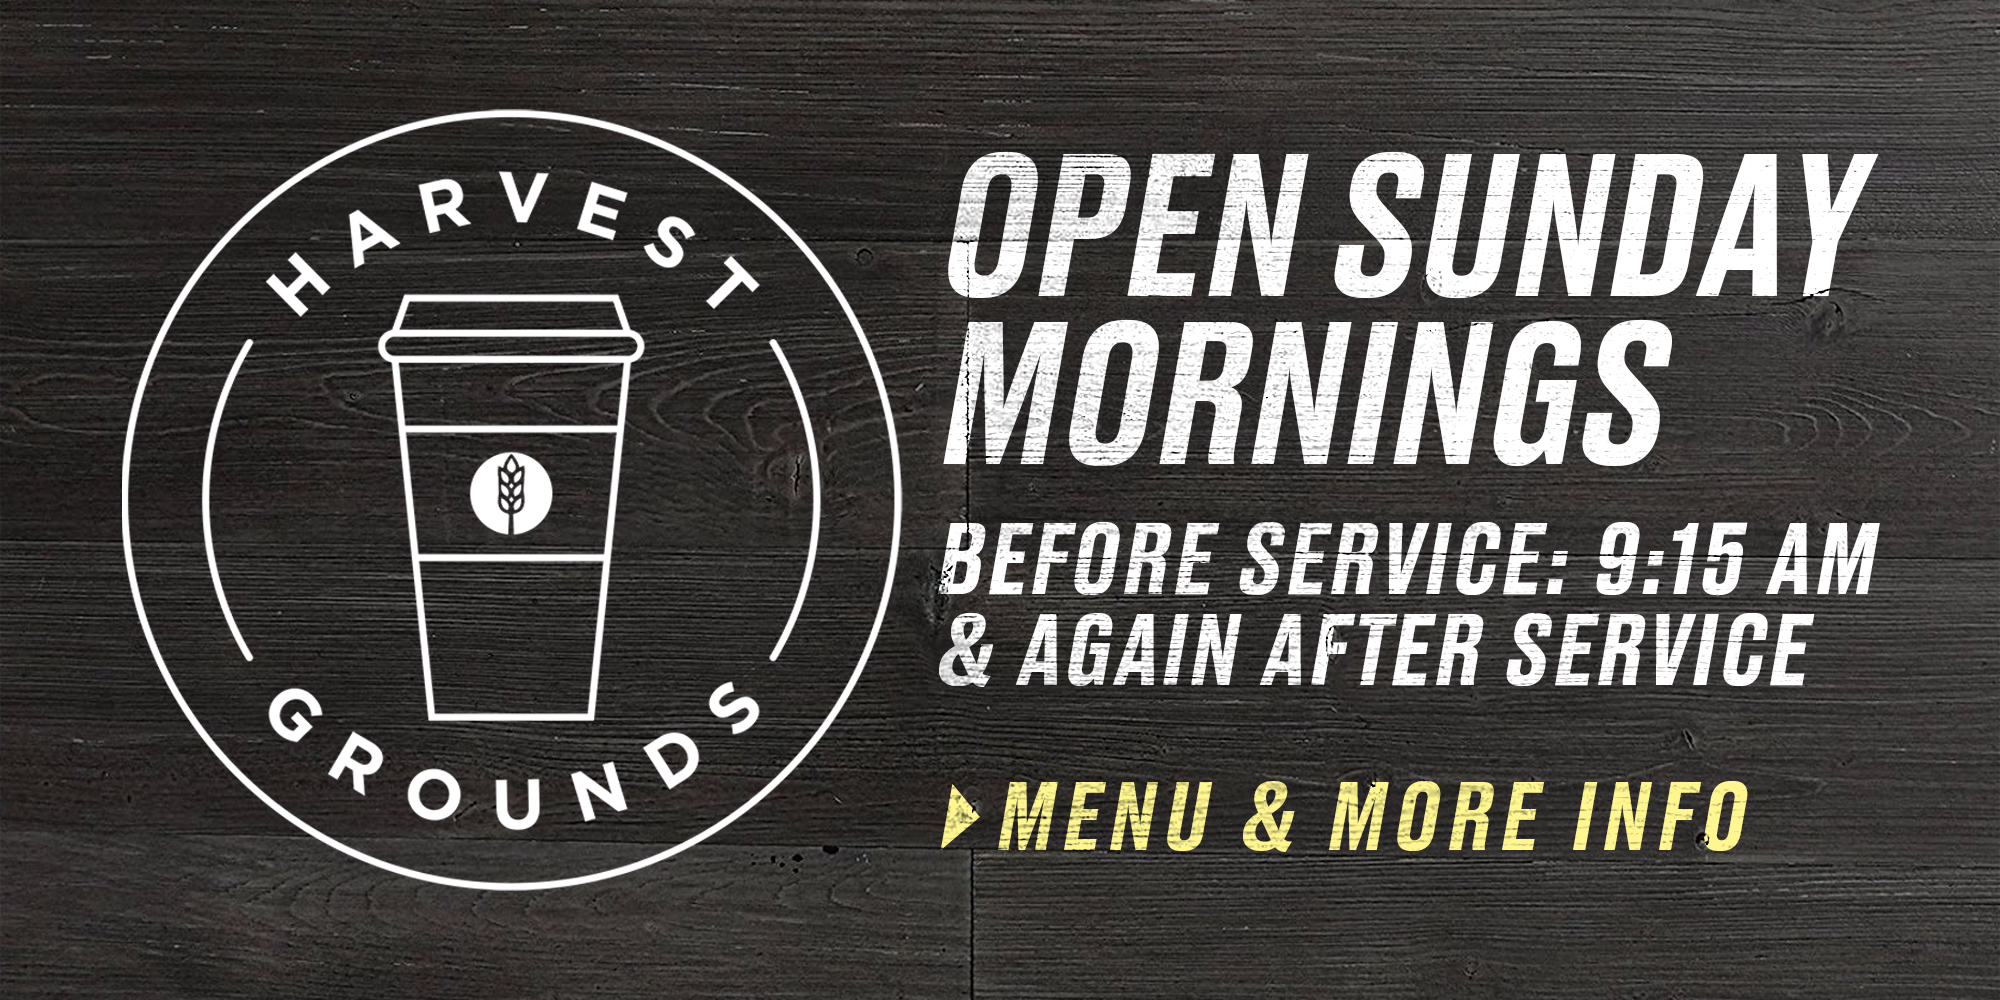 Open Sunday Mornings Before Service 9:15AM and Again After Service Menu and More Info